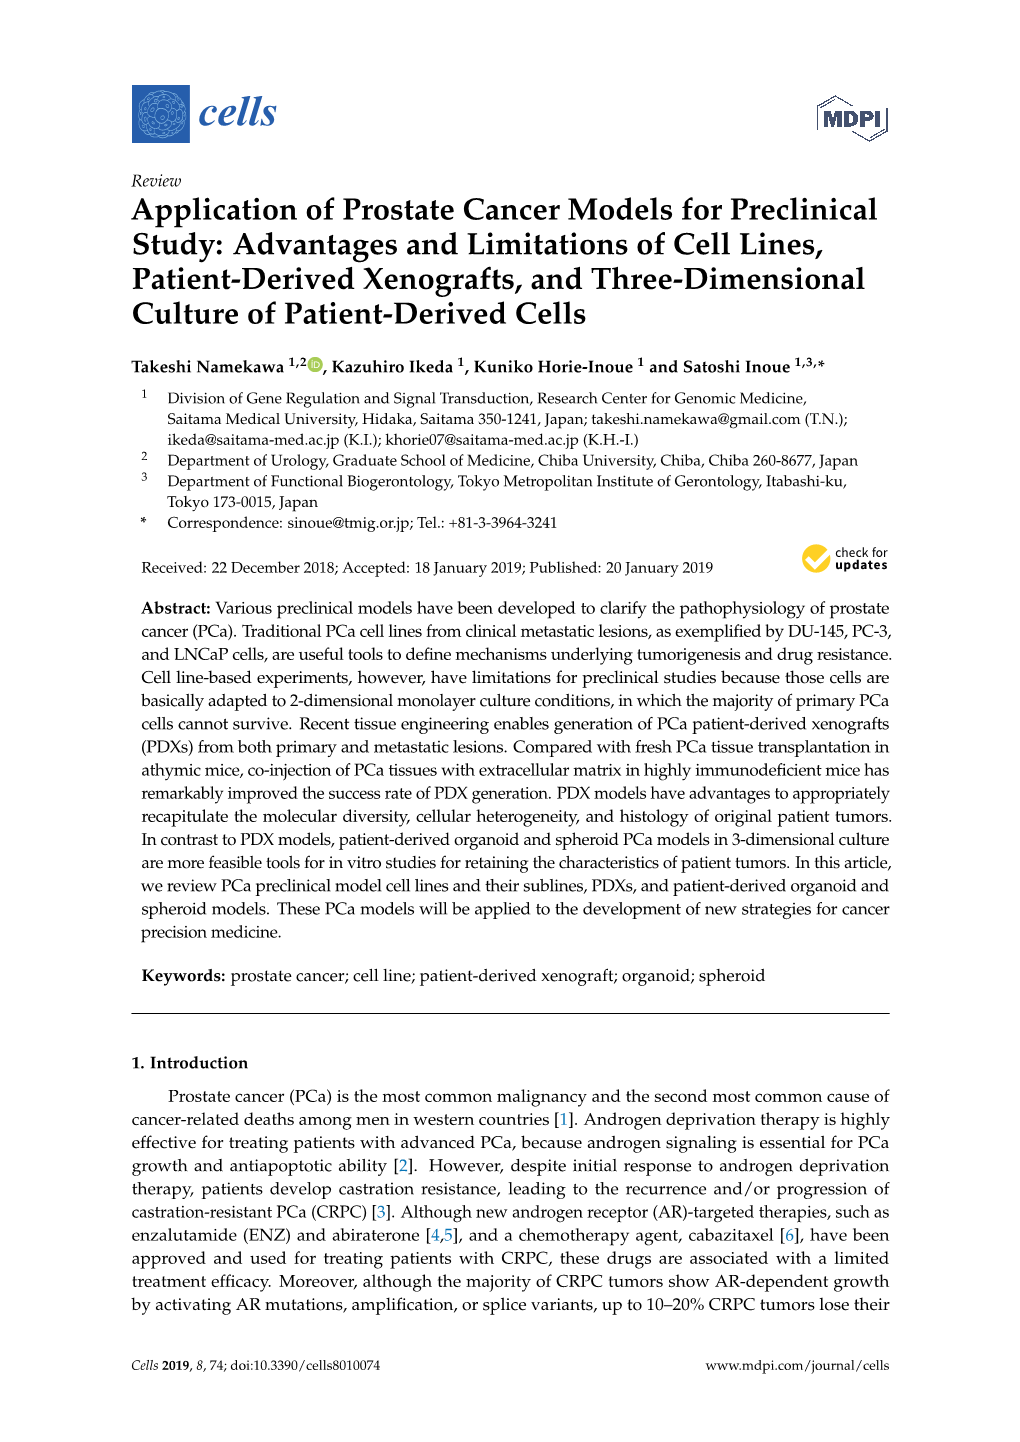 Advantages and Limitations of Cell Lines, Patient-Derived Xenografts, and Three-Dimensional Culture of Patient-Derived Cells